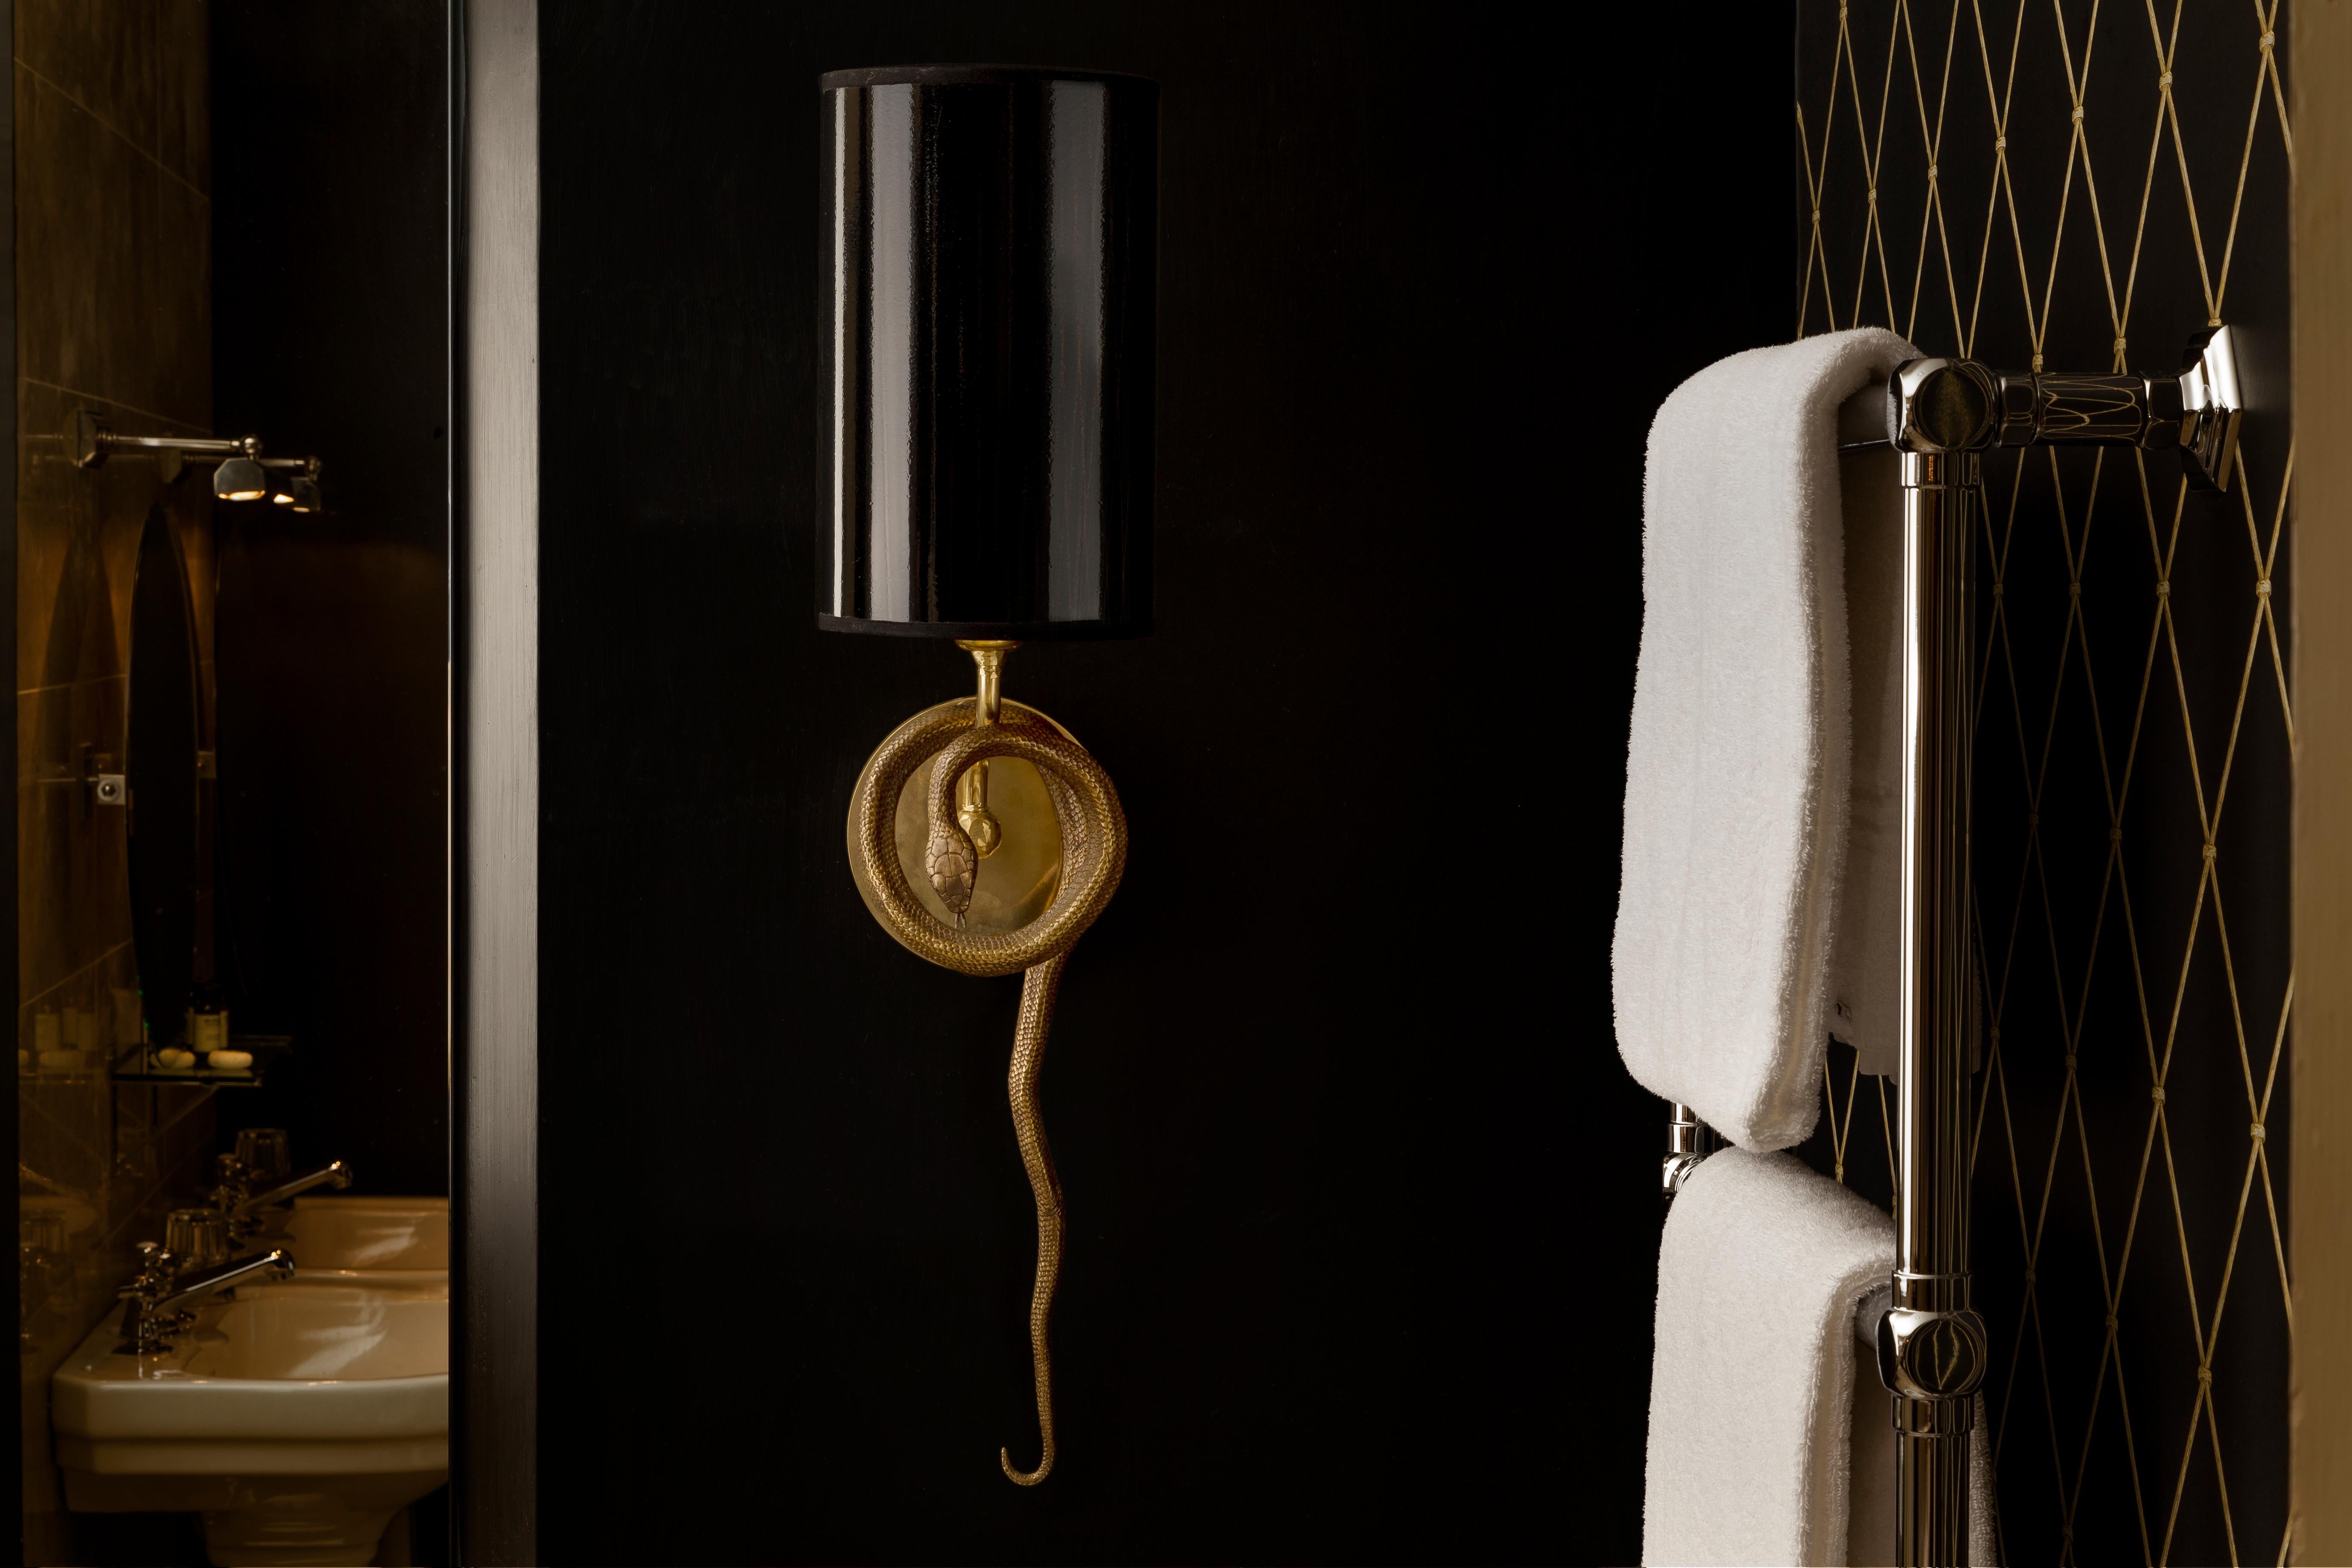 The Fauna 01 wall light, like the whole series of products in the Brass Brothers & Co. Eclectic collection, is inspired by the animal and plant world, sensual and tempting, the snake with its coils surrounds the arm of the wall light, recalling the